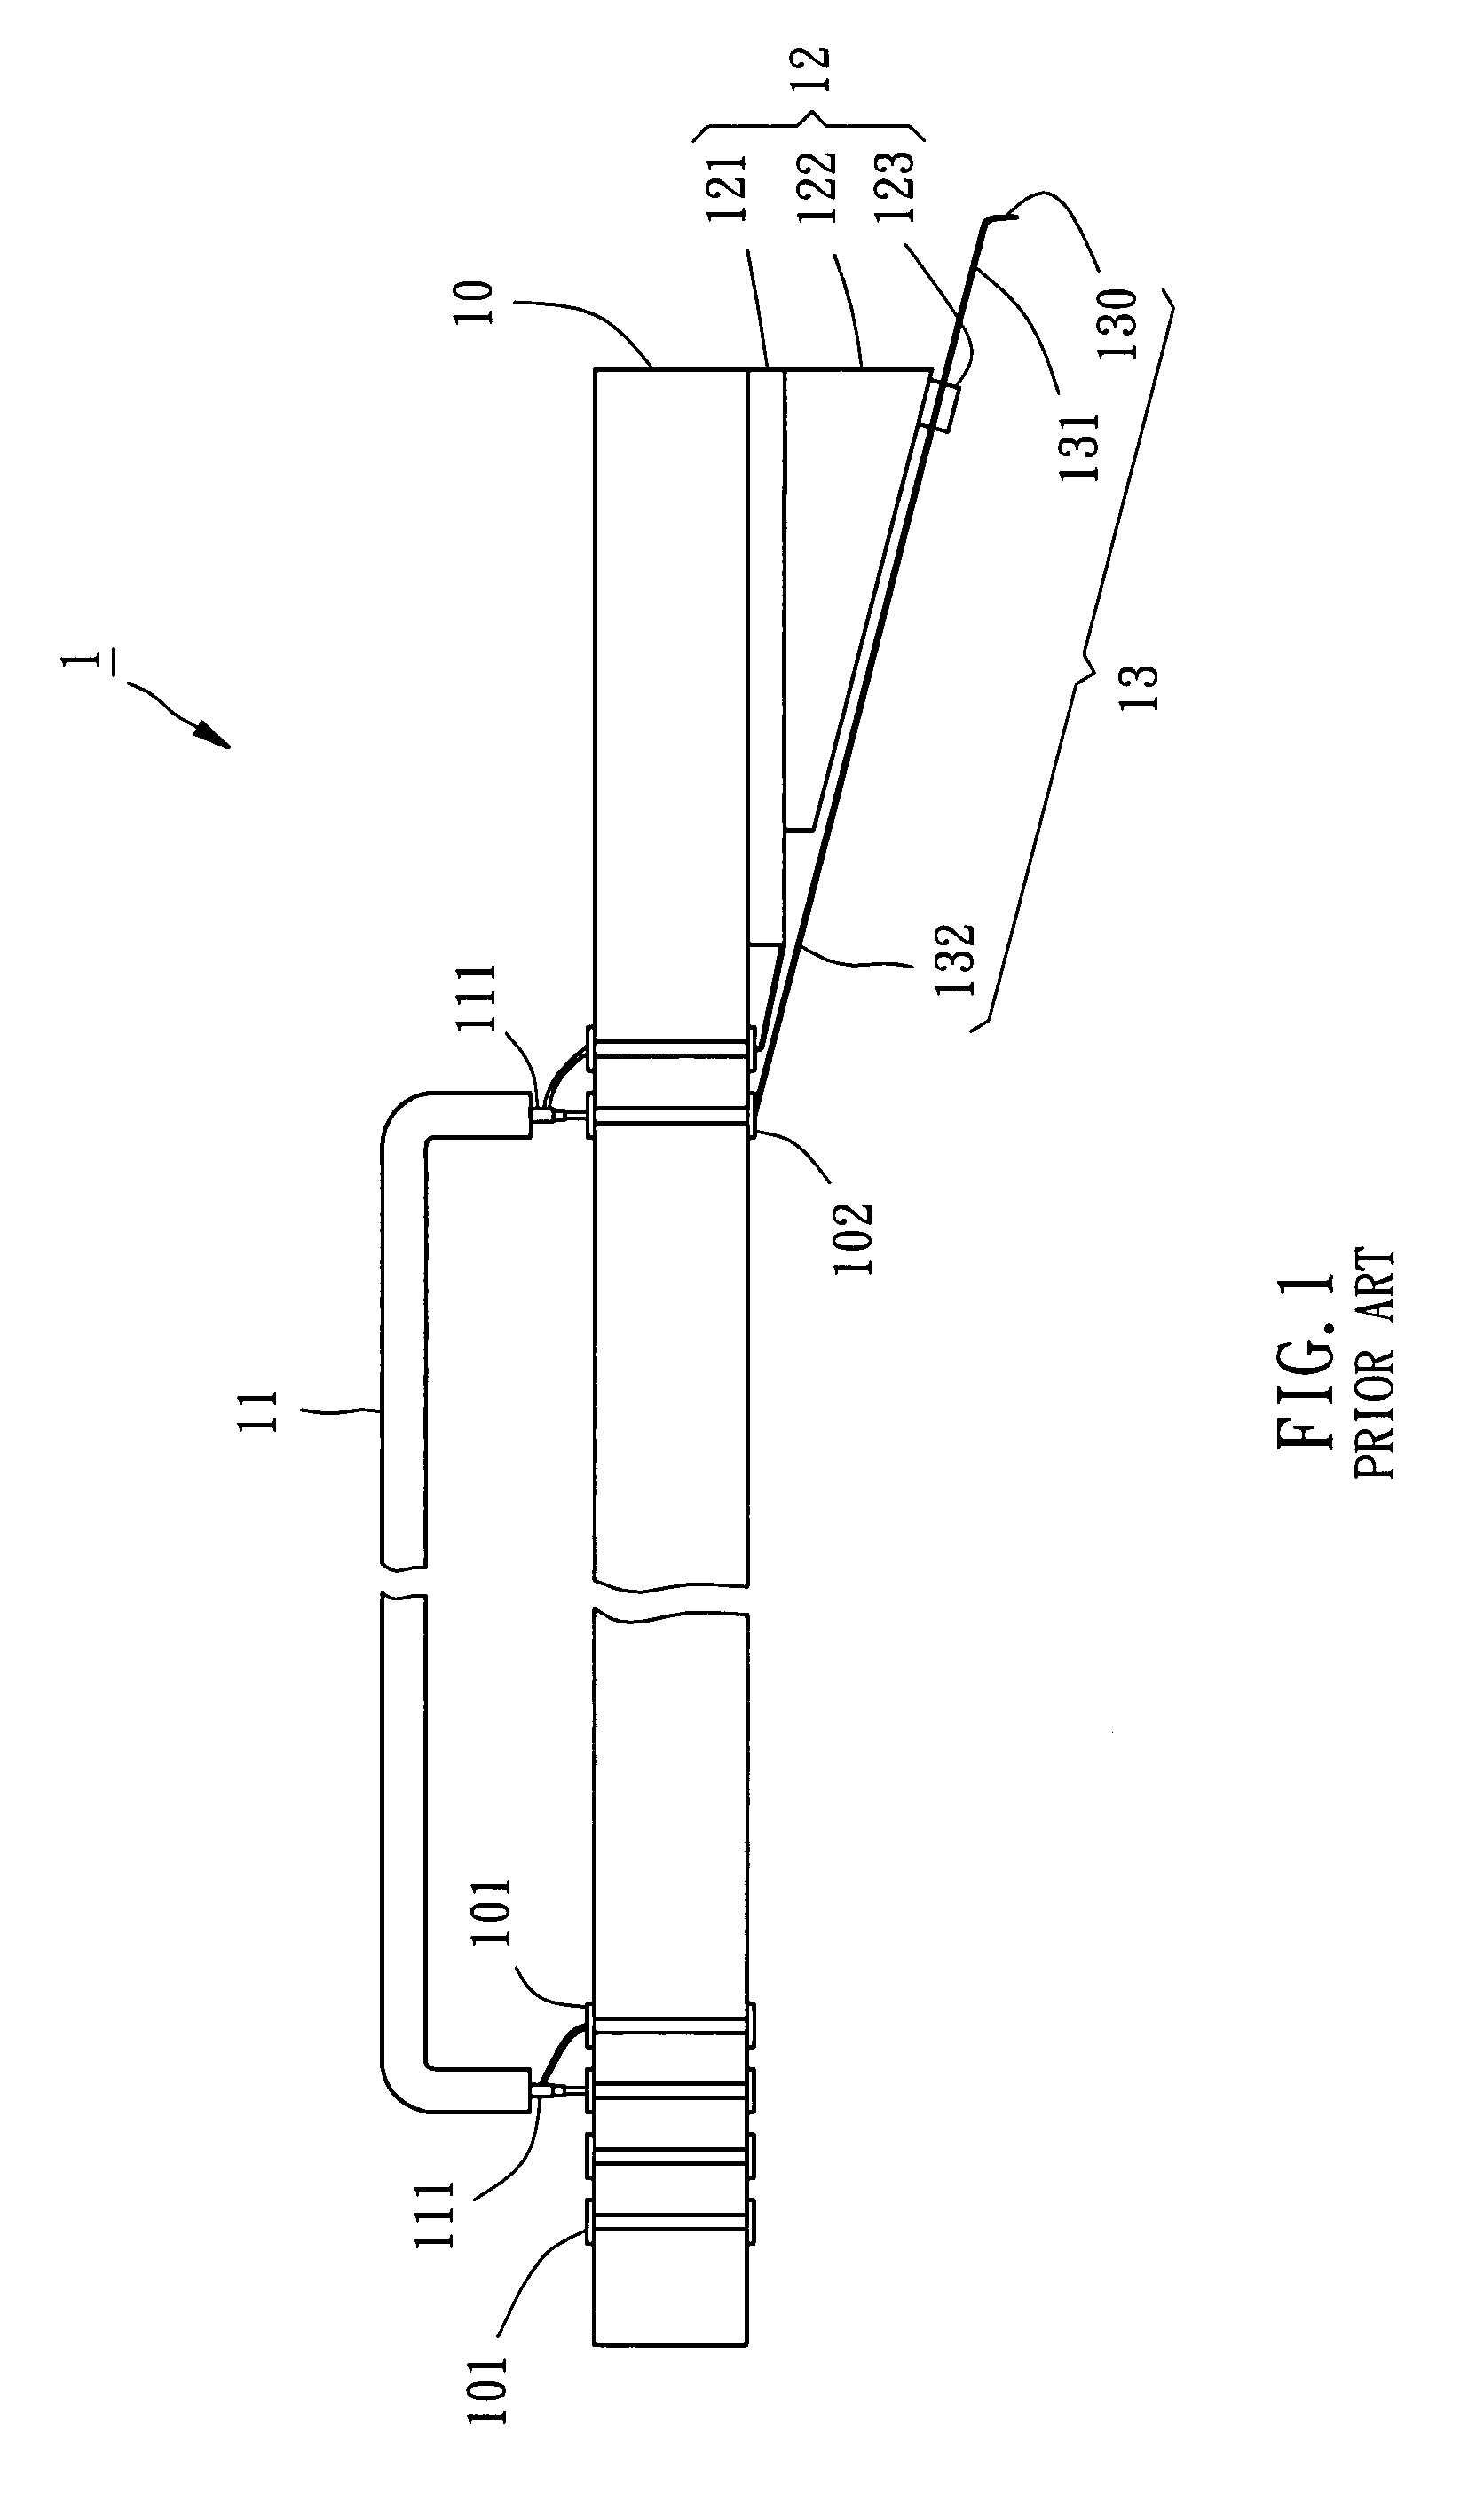 Cantilever-type probe card for high frequency application